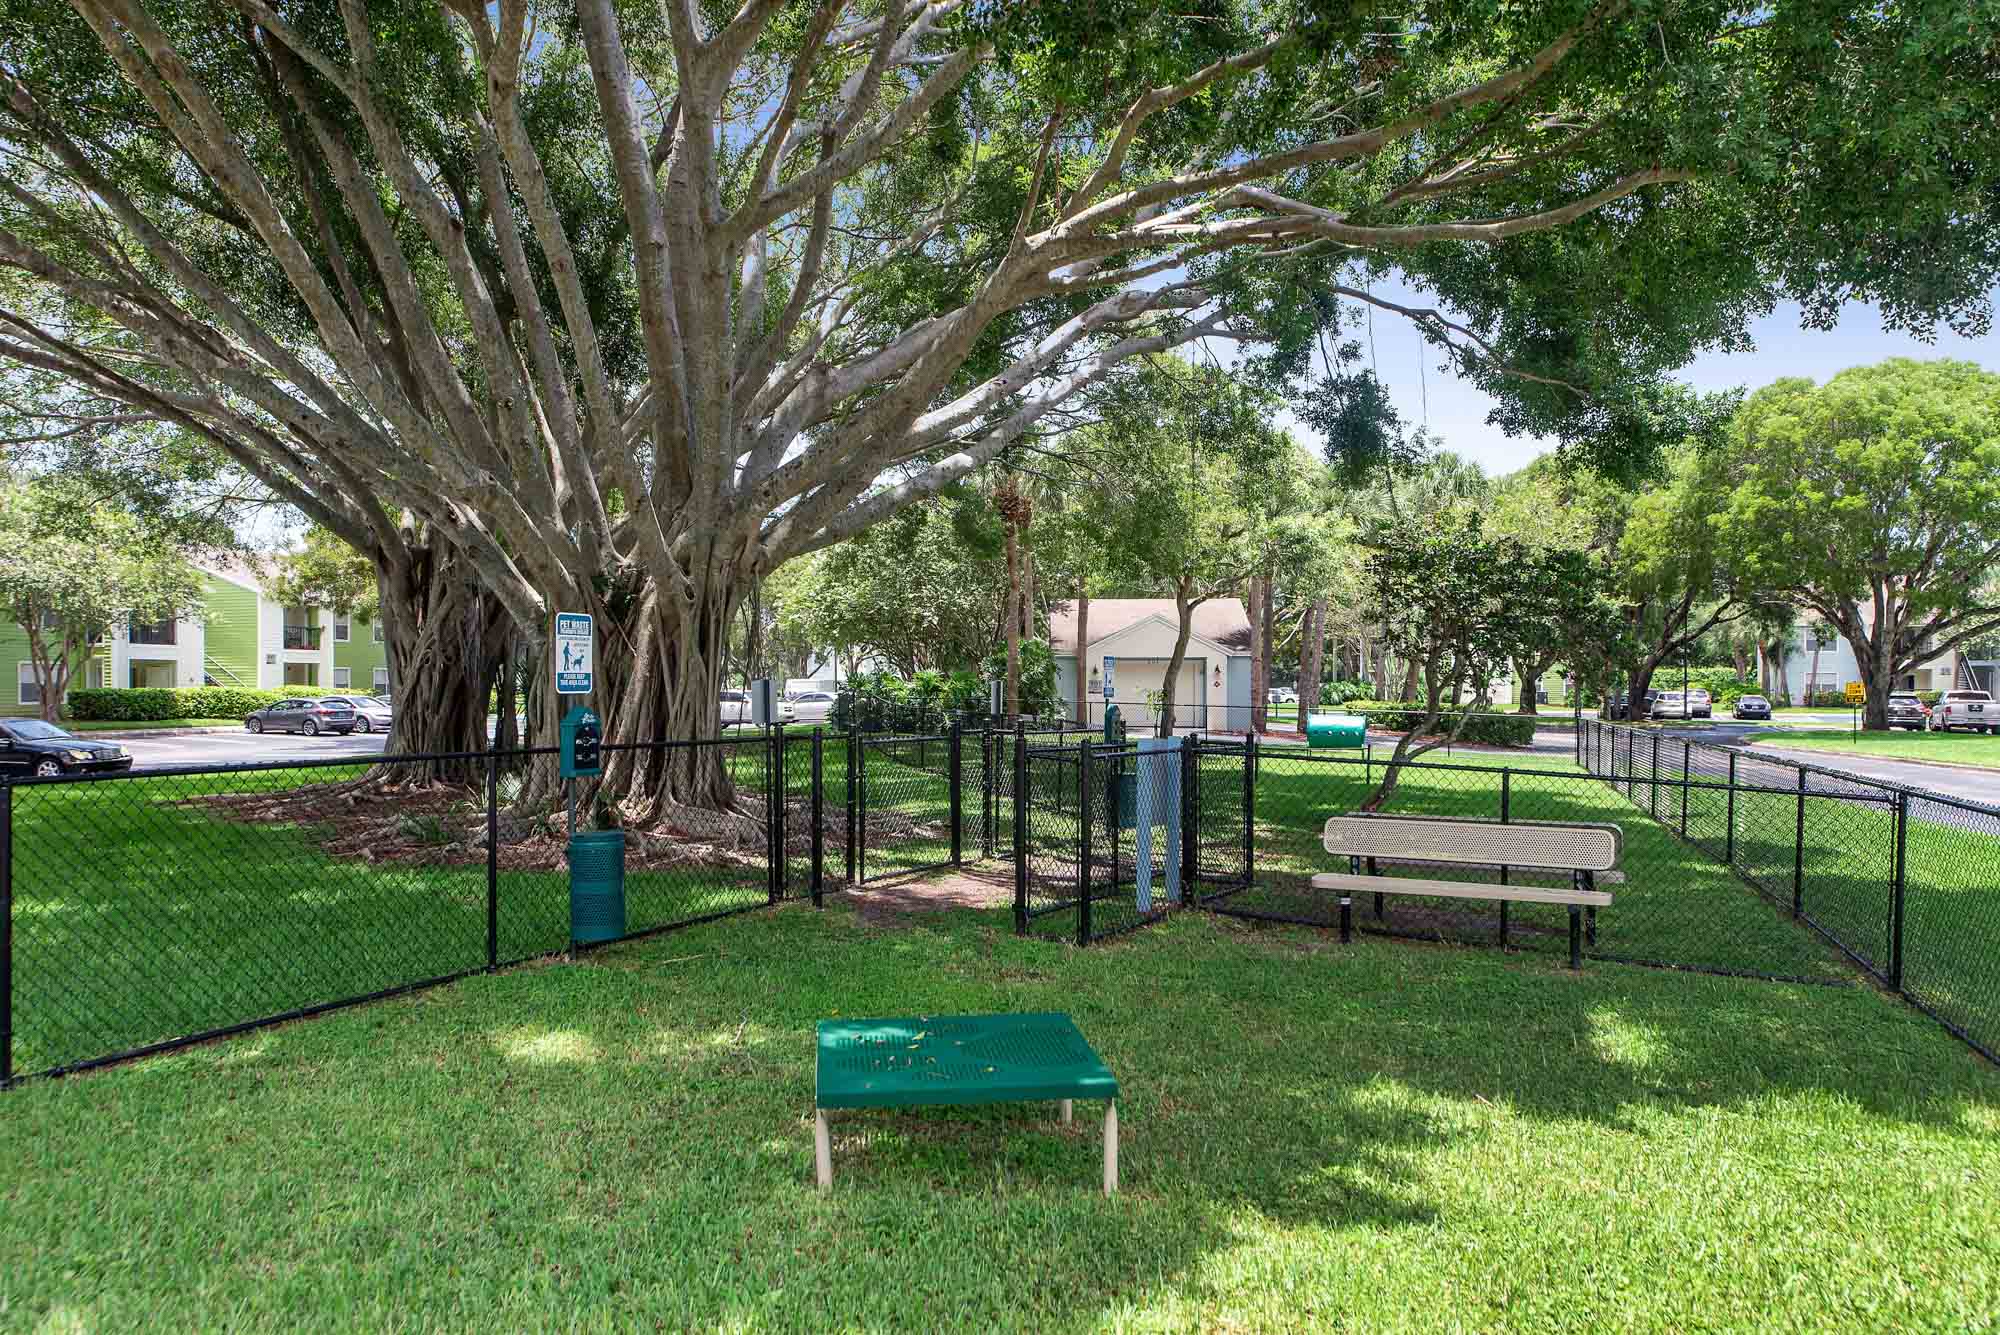 The dog park at Turtle Cove in West Palm Beach, FL.